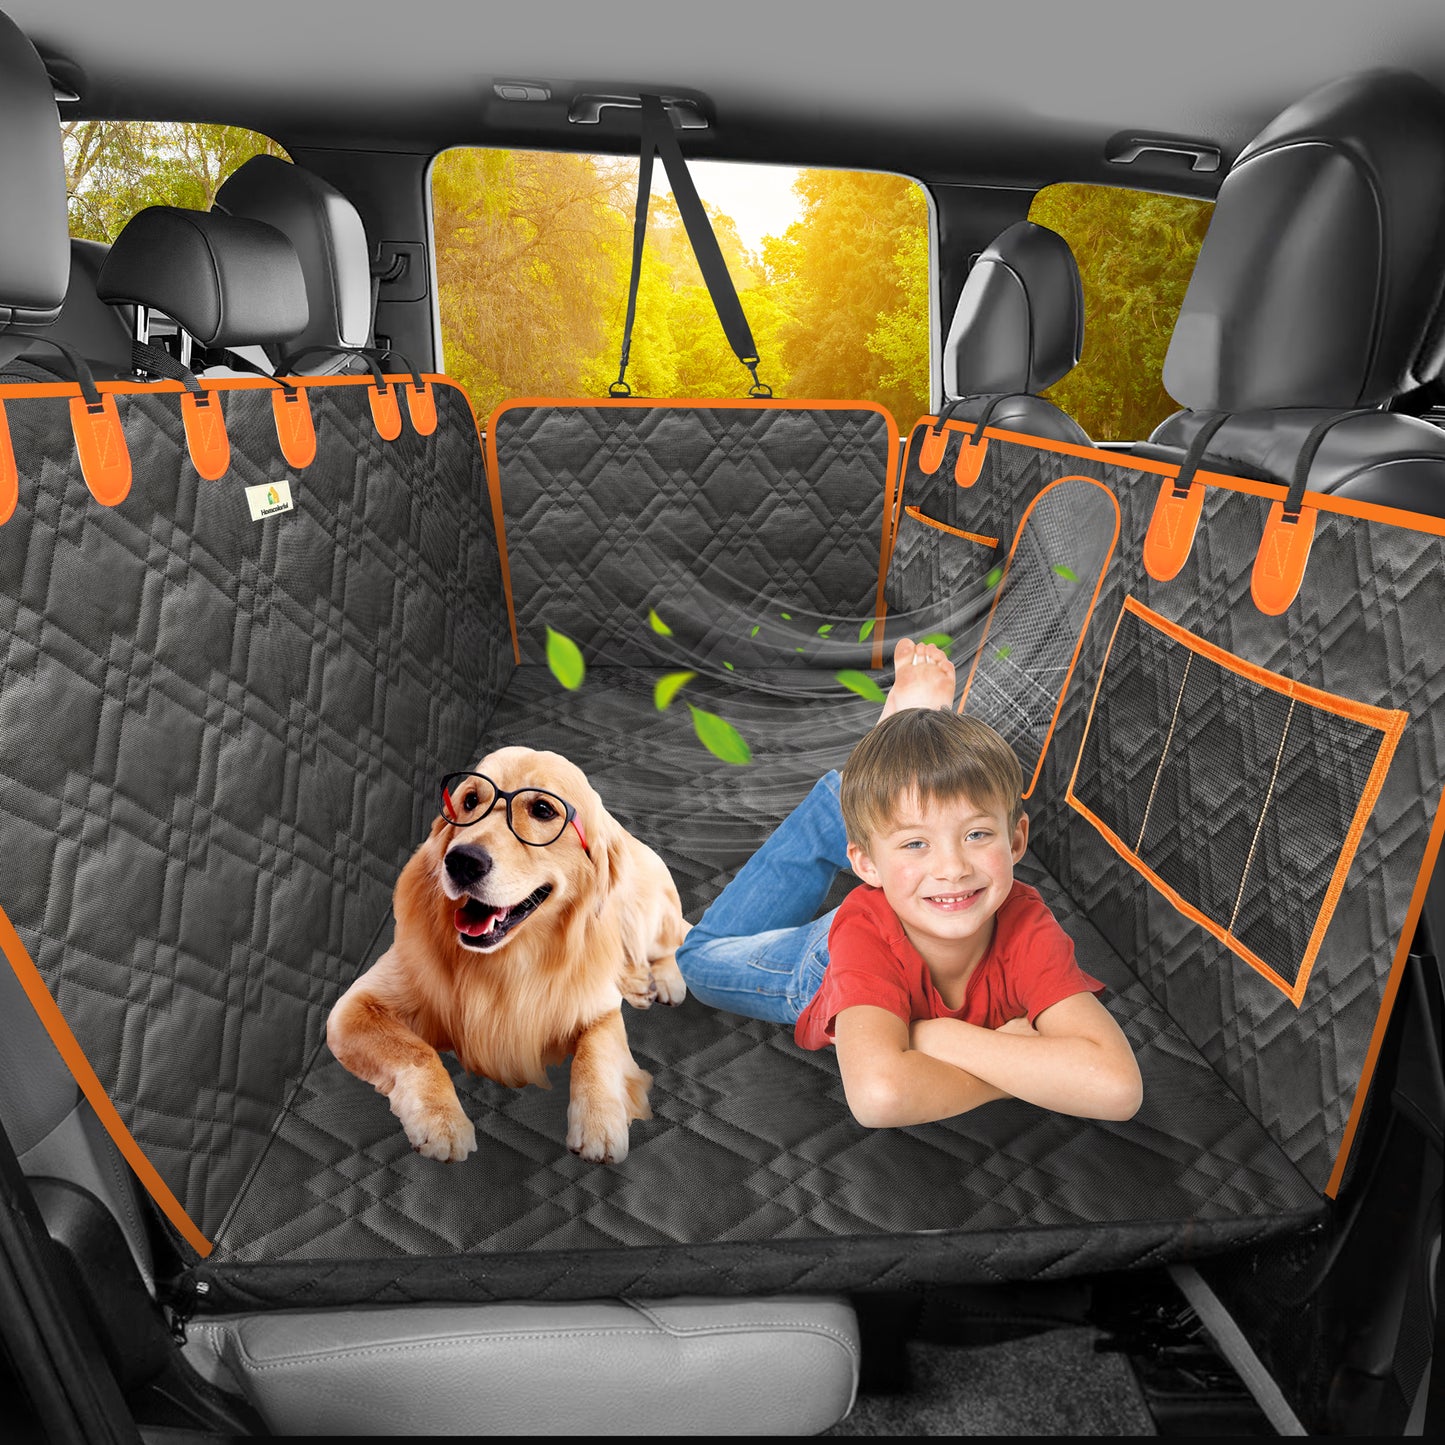 Back Seat Extender for Dogs, Dog Car Seat Cover with Hard Bottom, Dog Car Seat Bed, Waterproof Dog Hammock for Car, Pet Backseat Protector with Mesh Window, Storage Pocket for Car, SUV, Truck